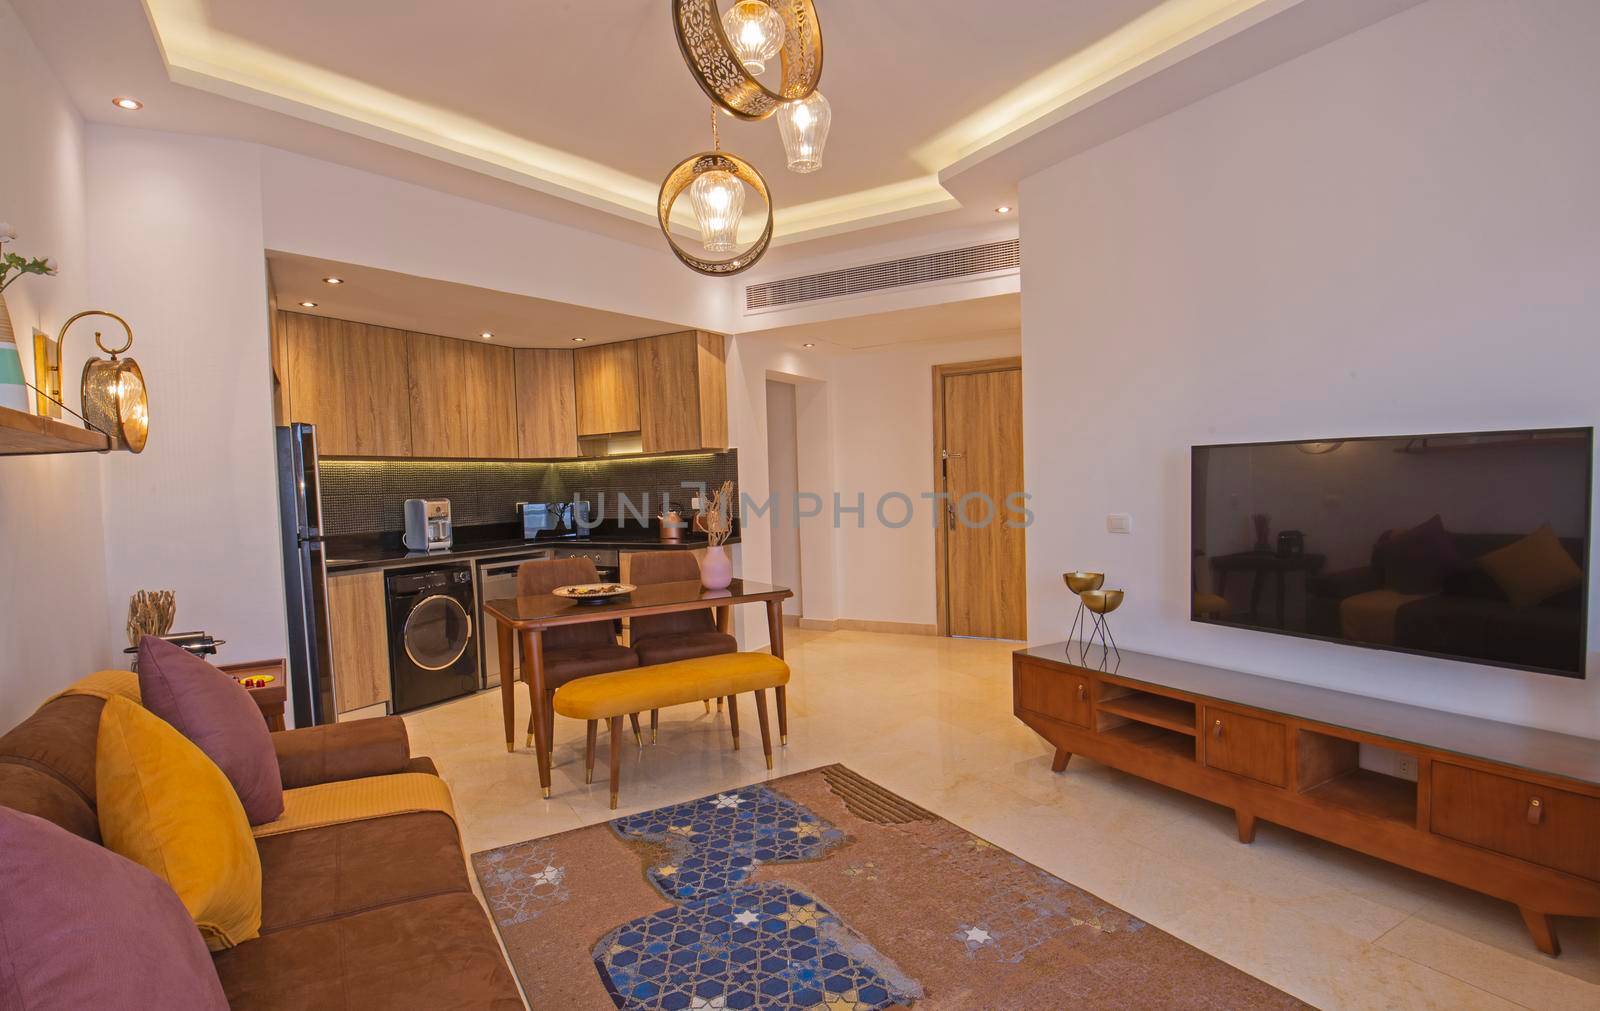 Living room lounge area in luxury apartment show home showing interior design decor furnishing with kitchen